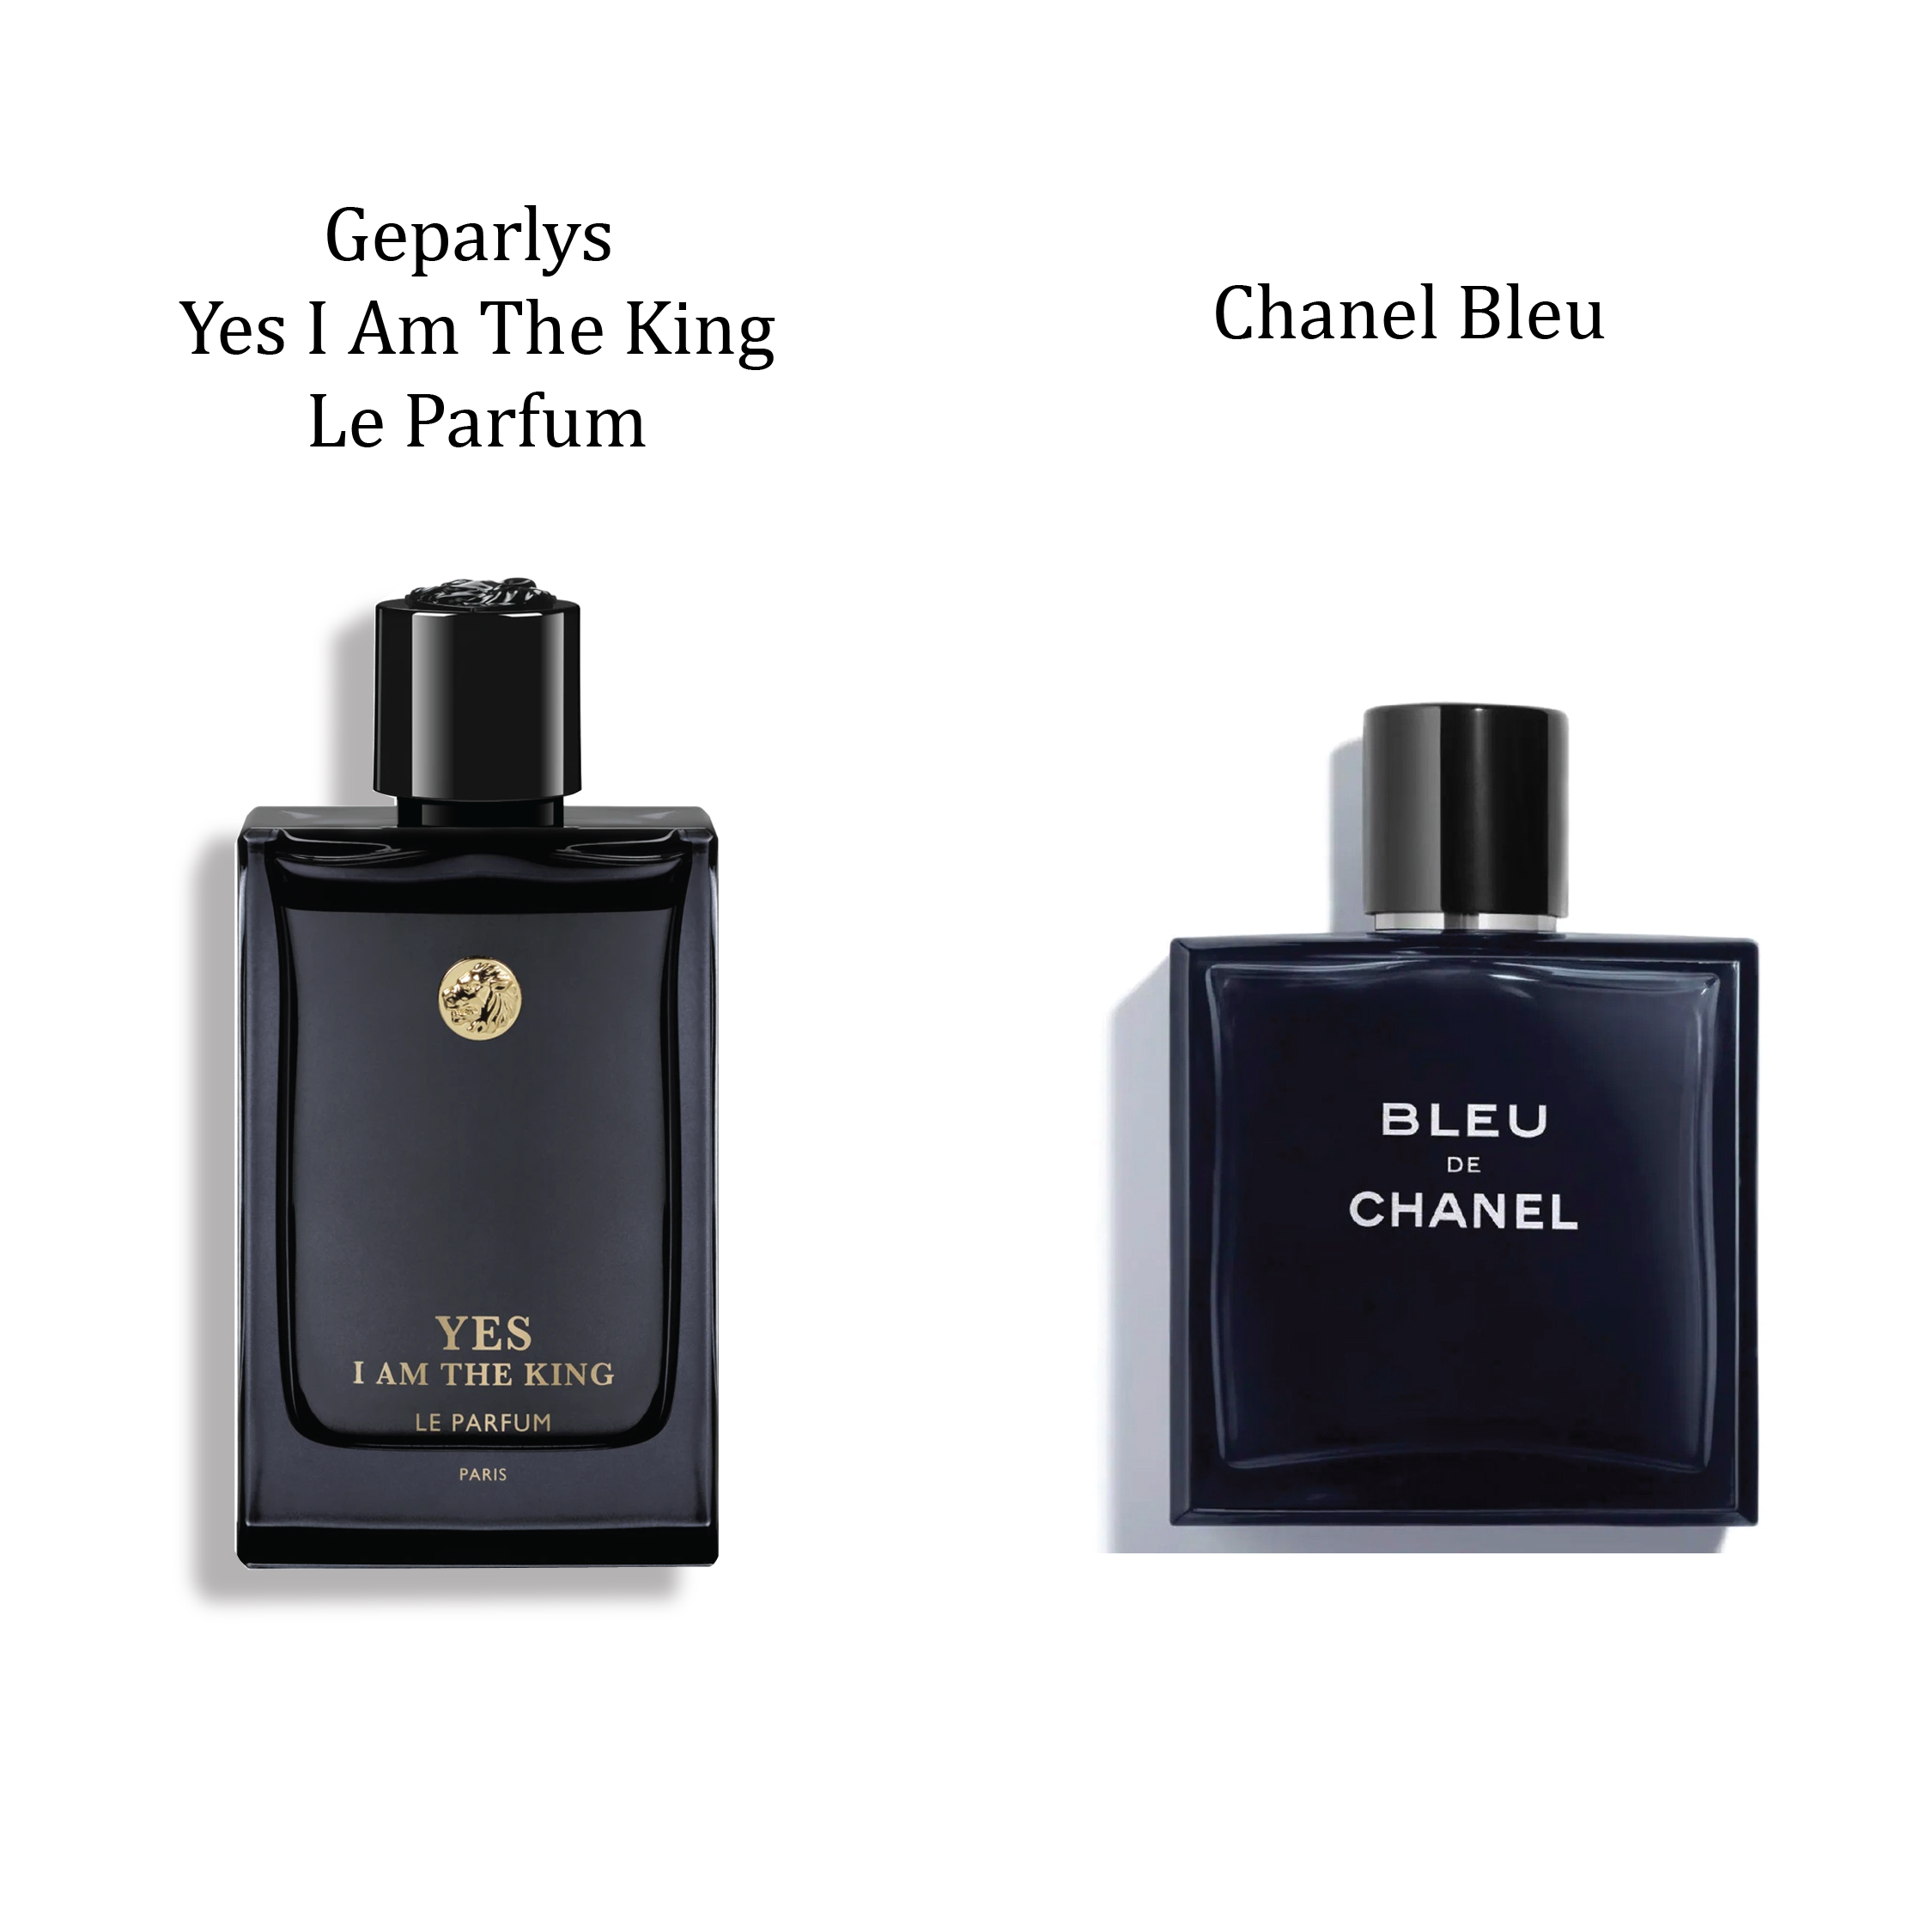 Geparlys Yes I Am The King Le Parfum EDP